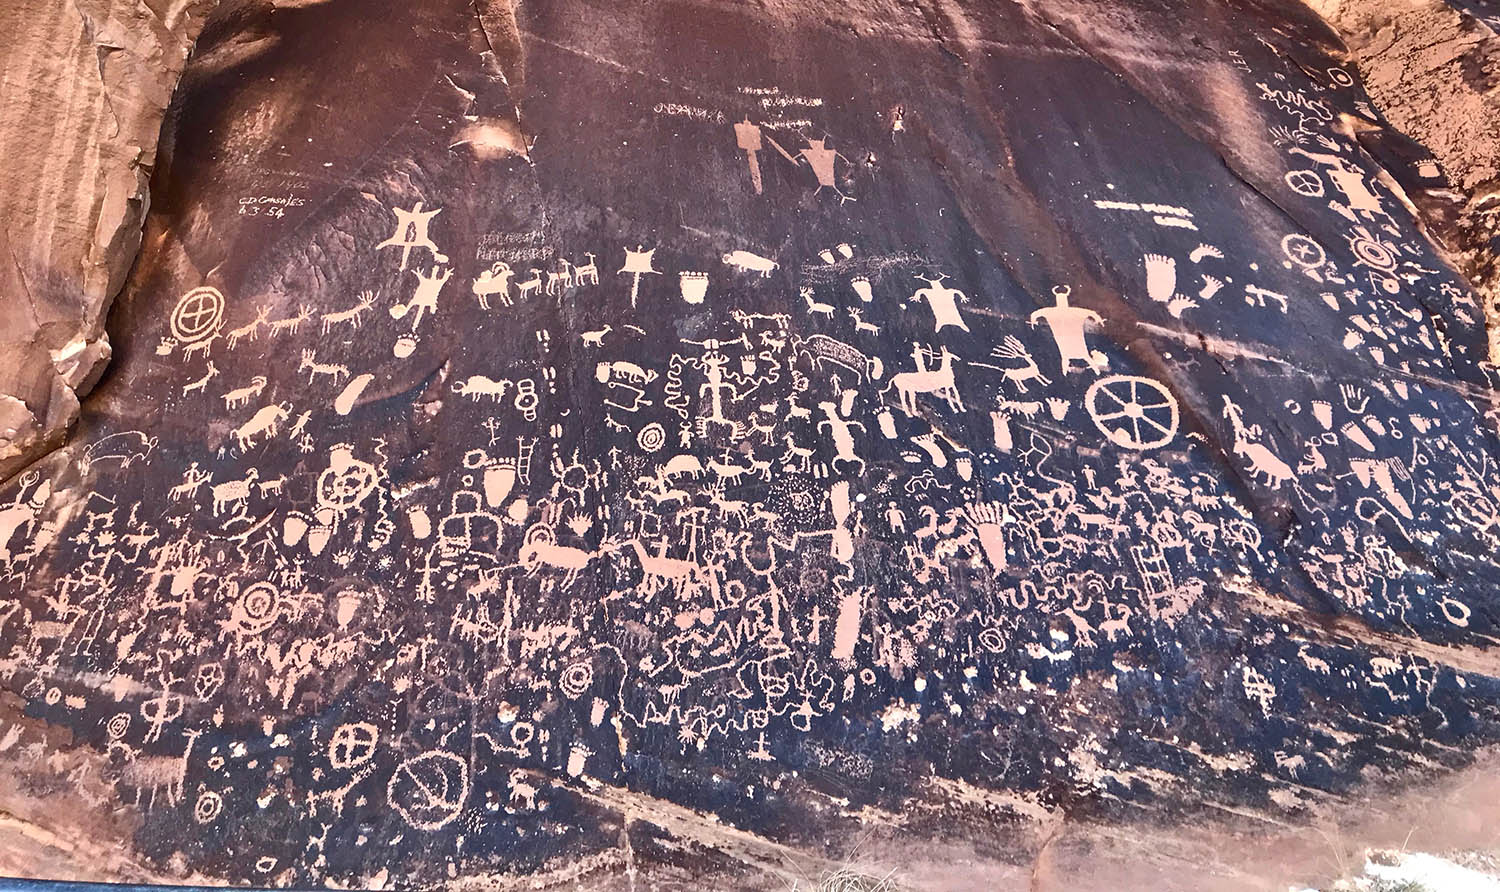 A cluster of petroglyphs adorn the surface of a rock face.